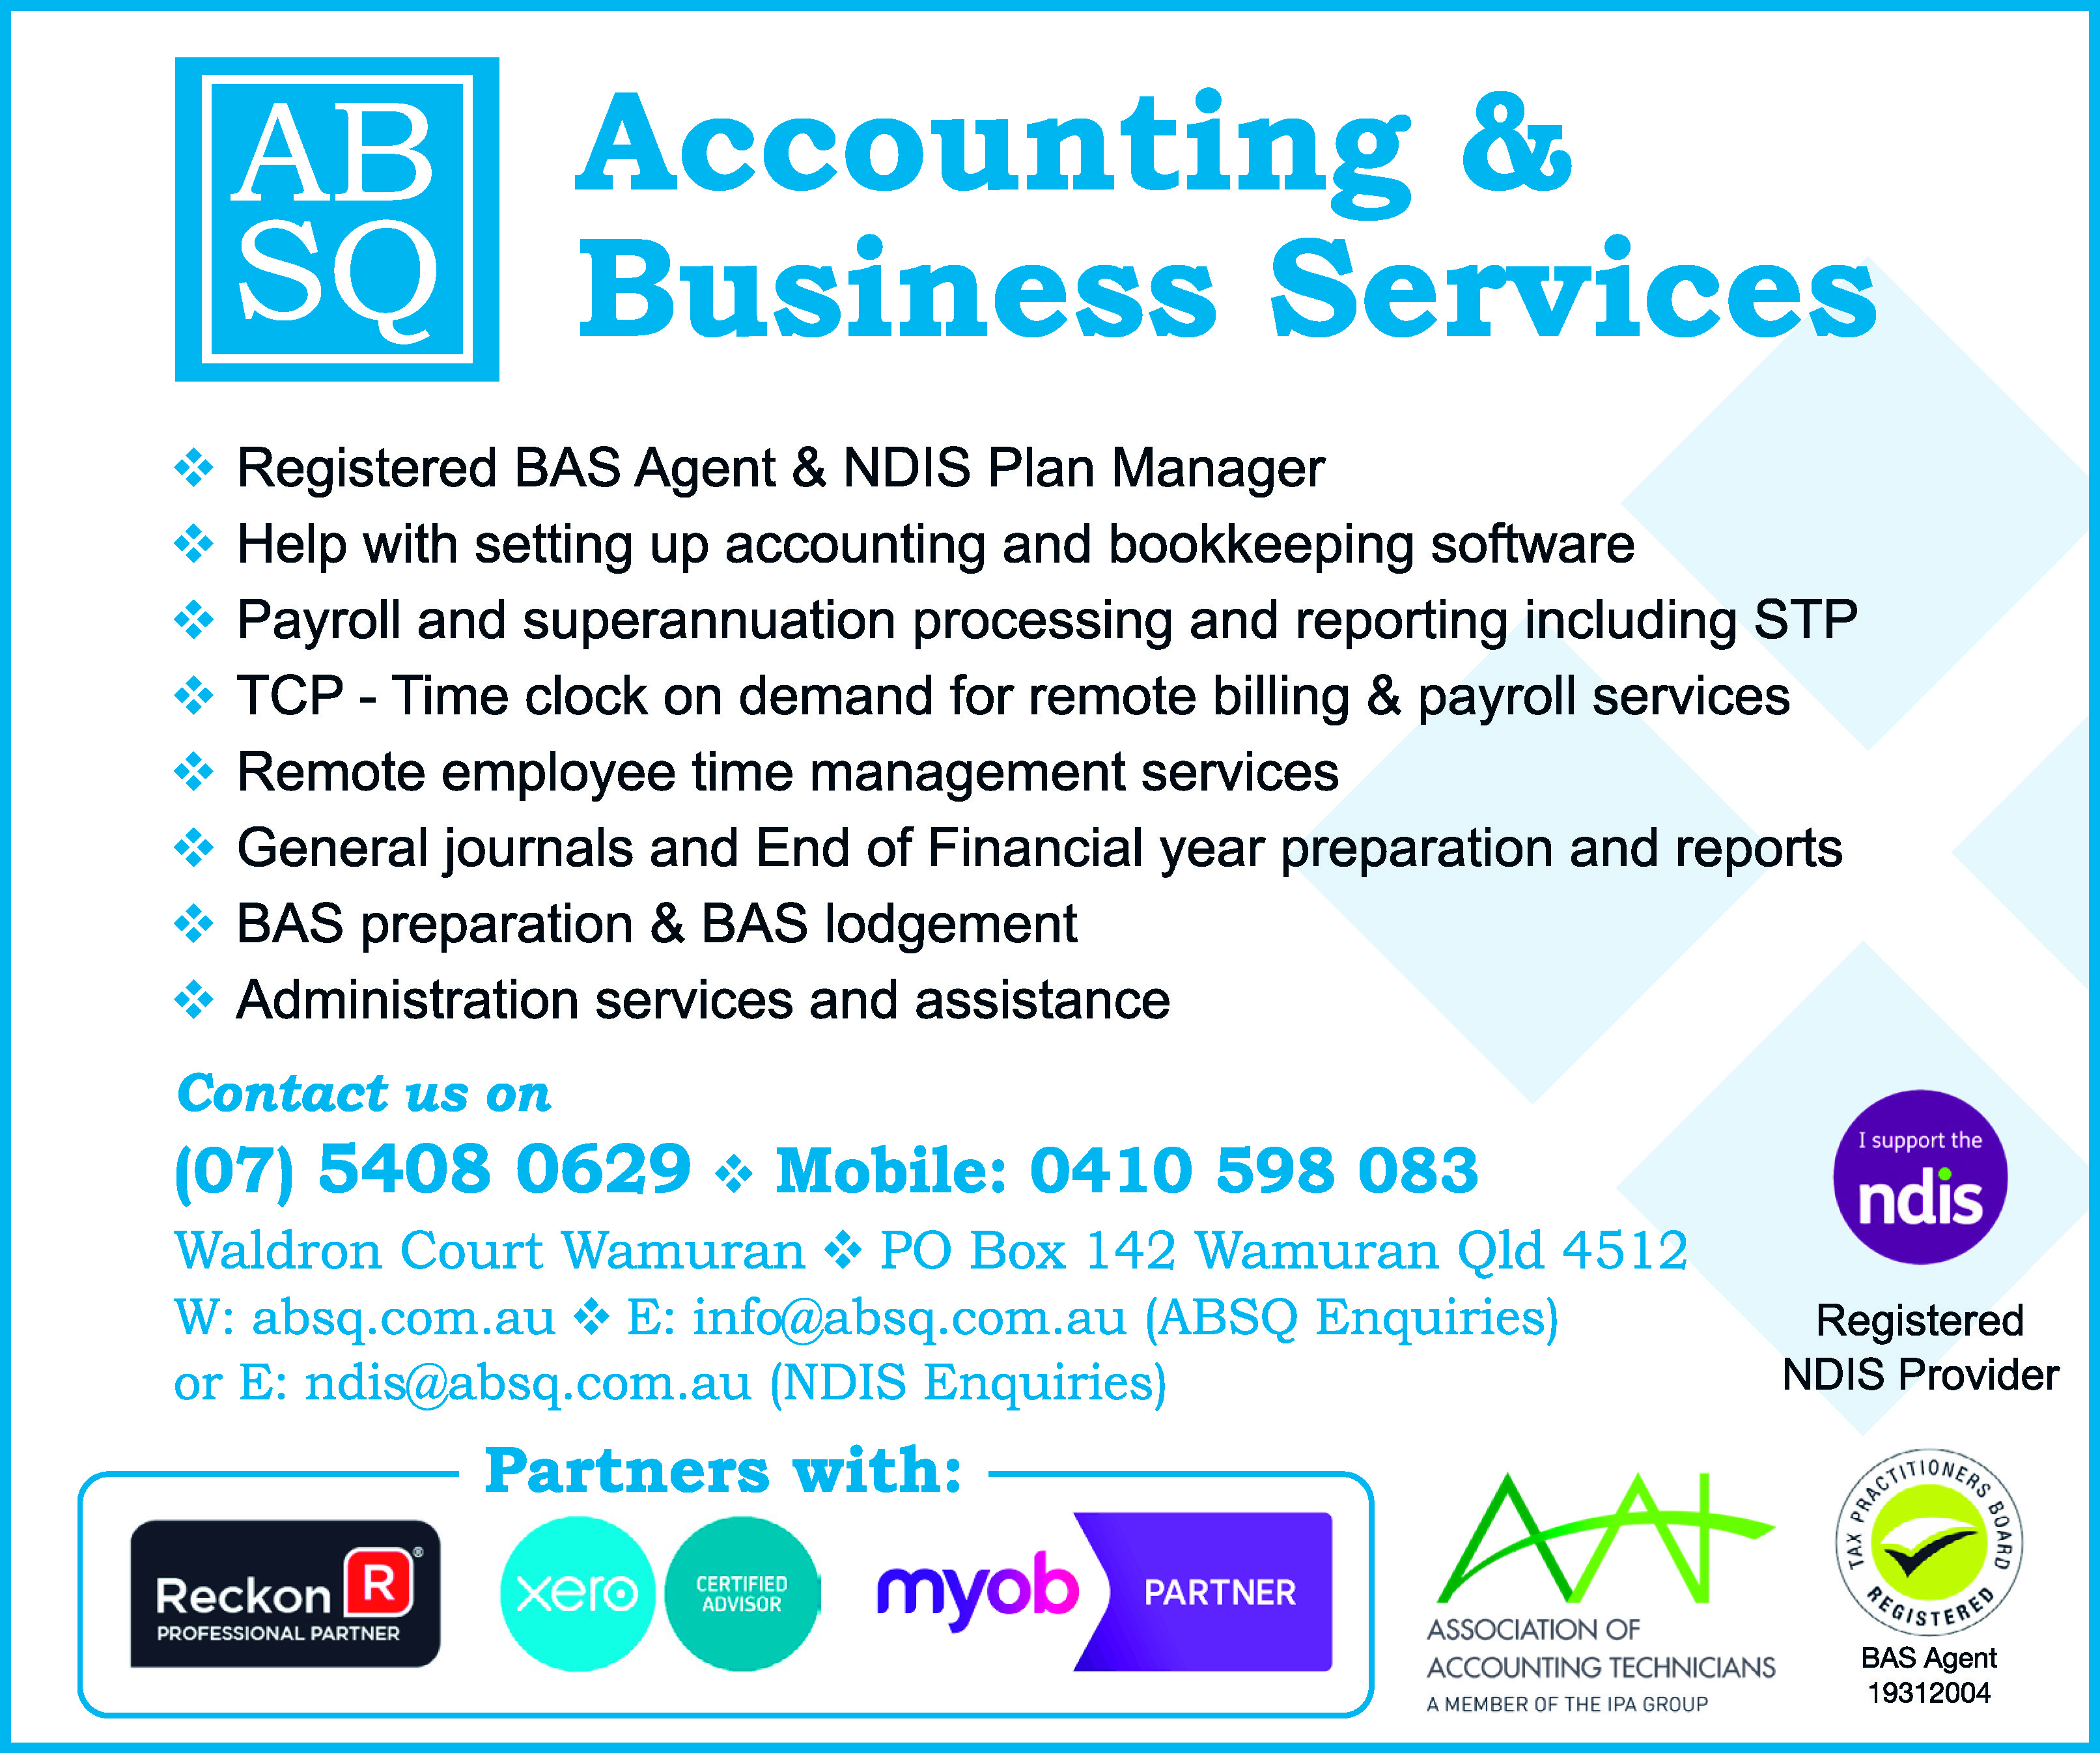 ABSQ Accounting and Business Services - advertisement